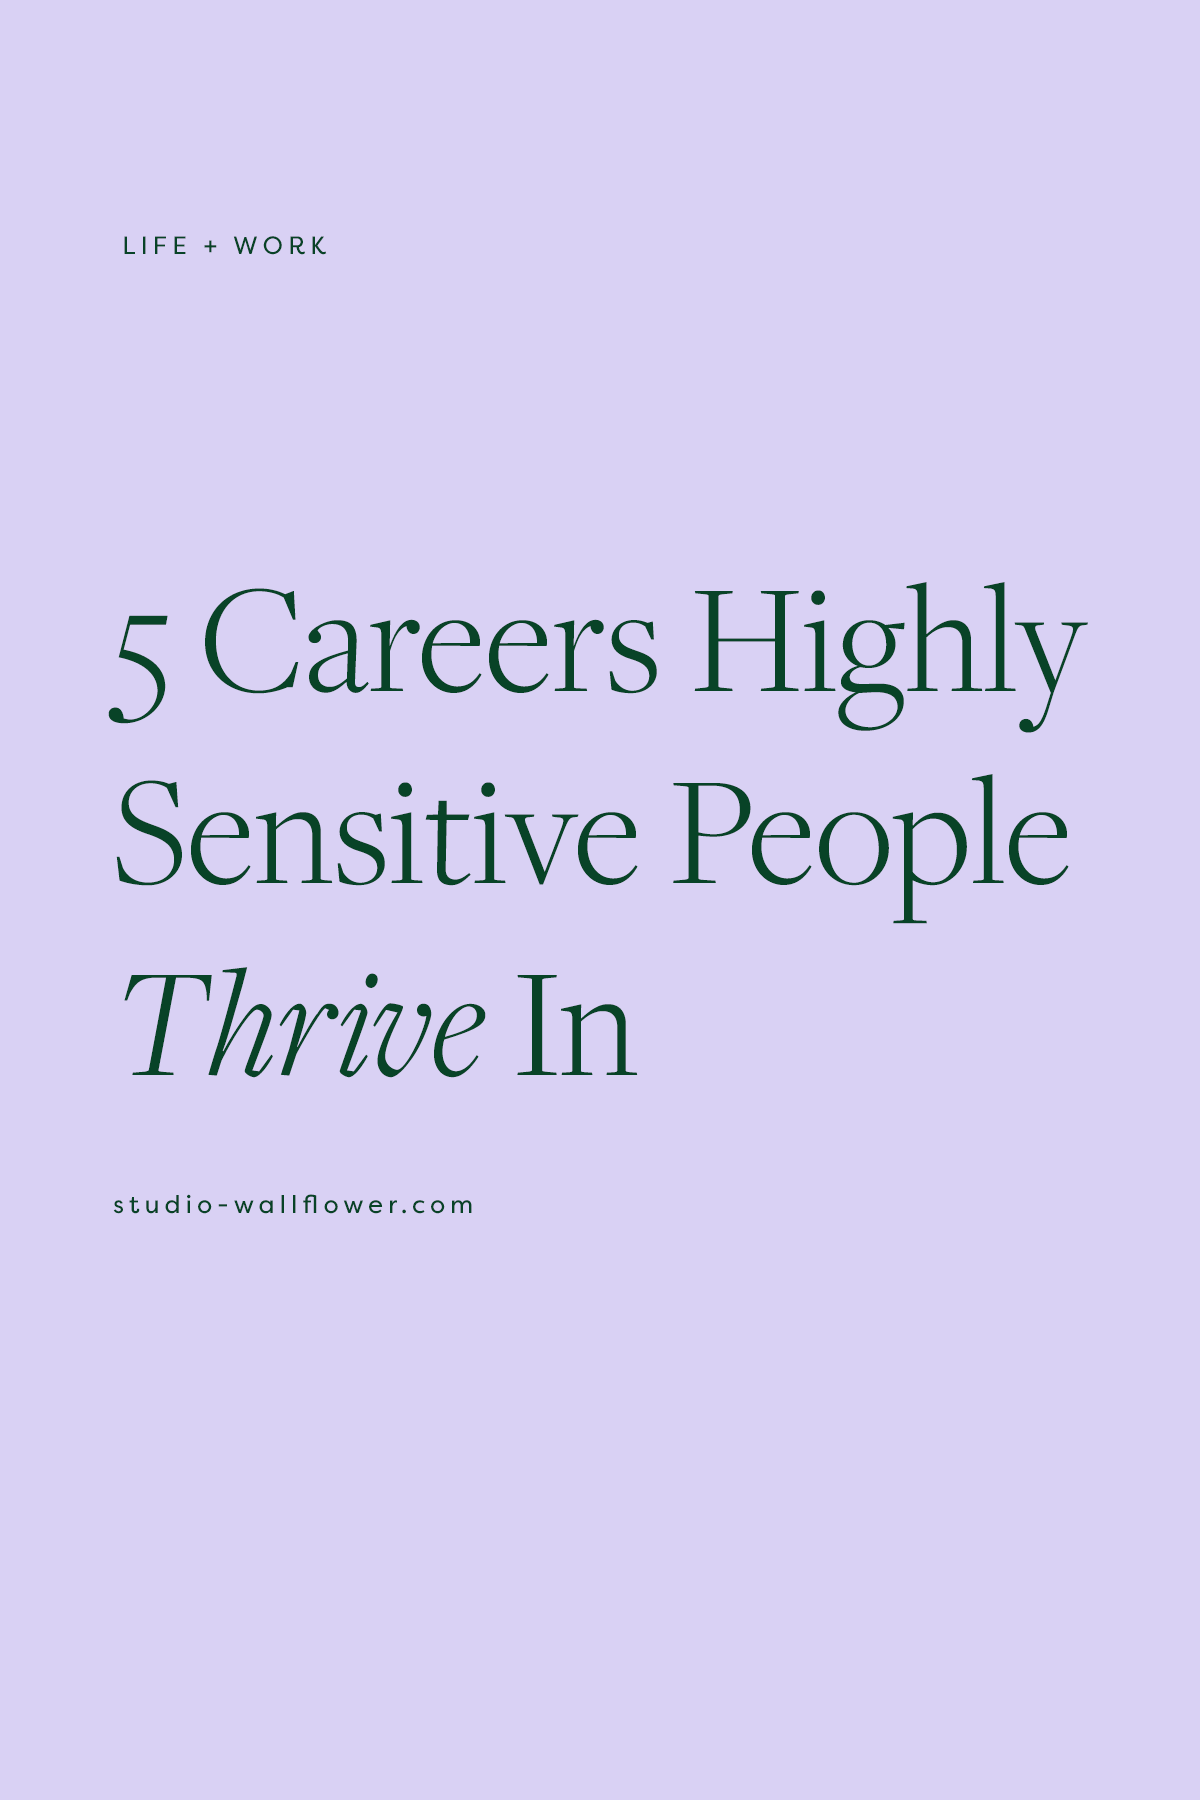 5 Careers Highly Sensitive People Thrive In